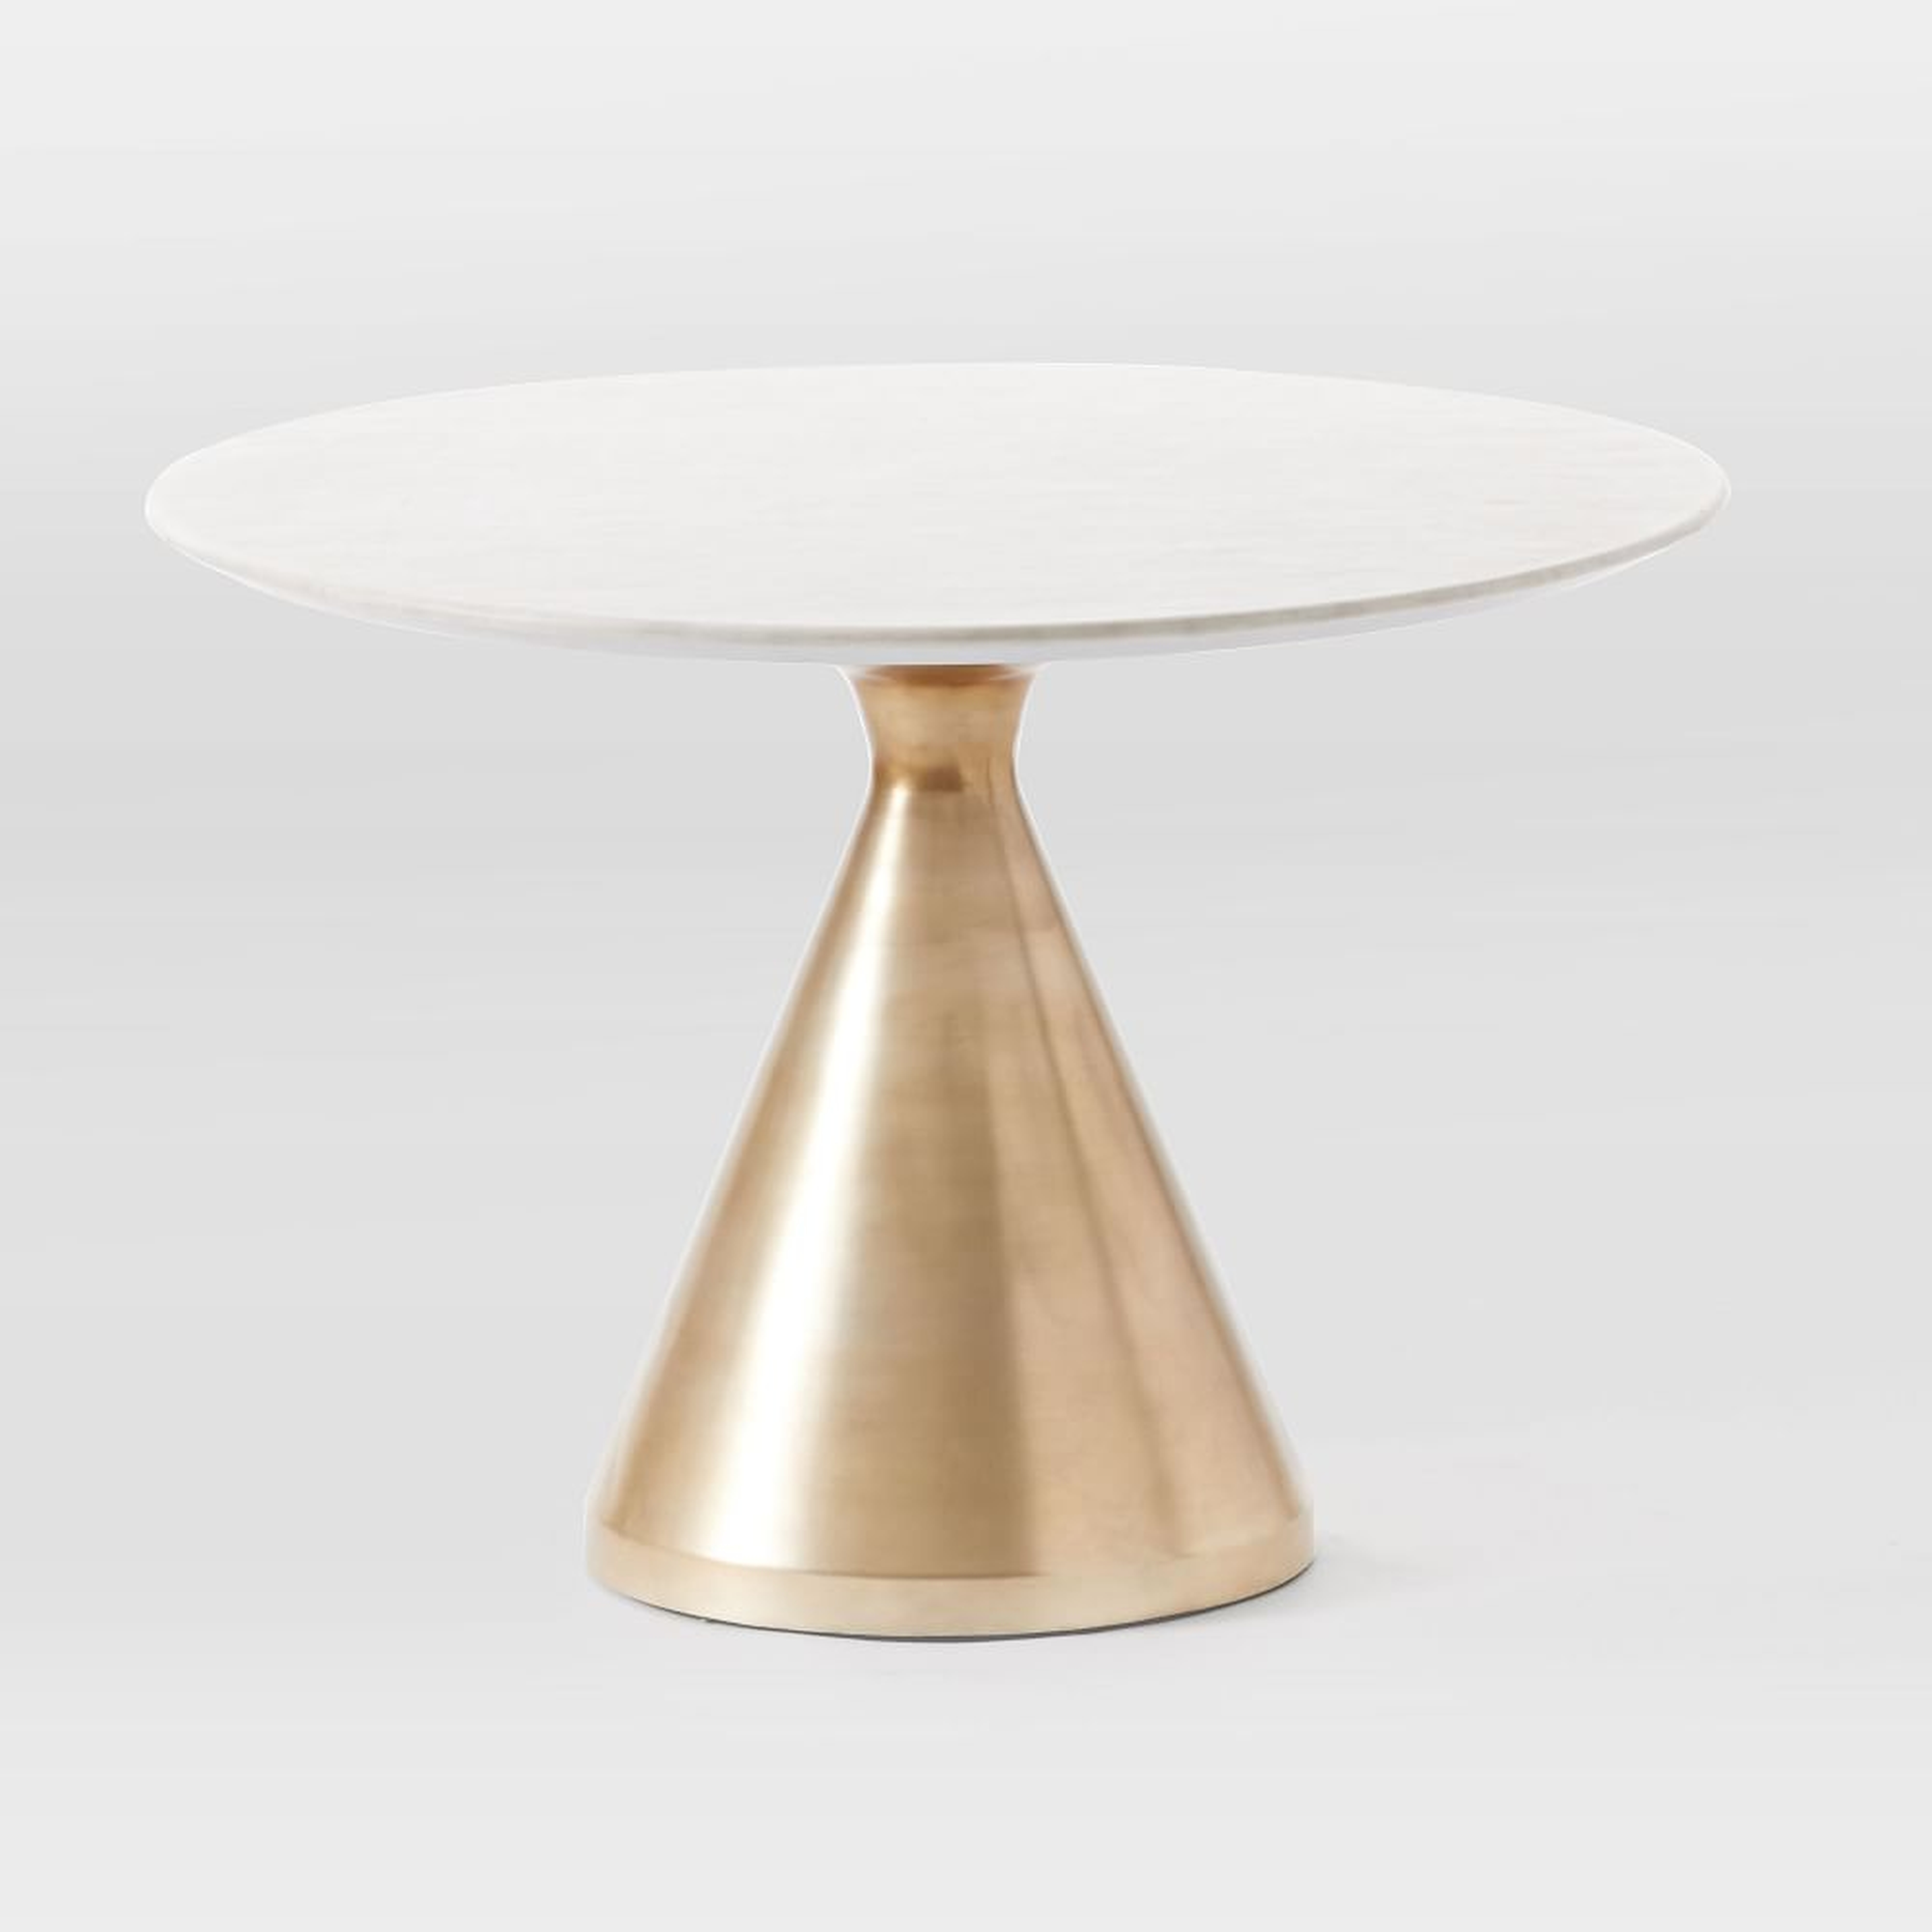 Silhouette Pedestal Dining Table, Round, 44", Marble, Antique Brass - West Elm